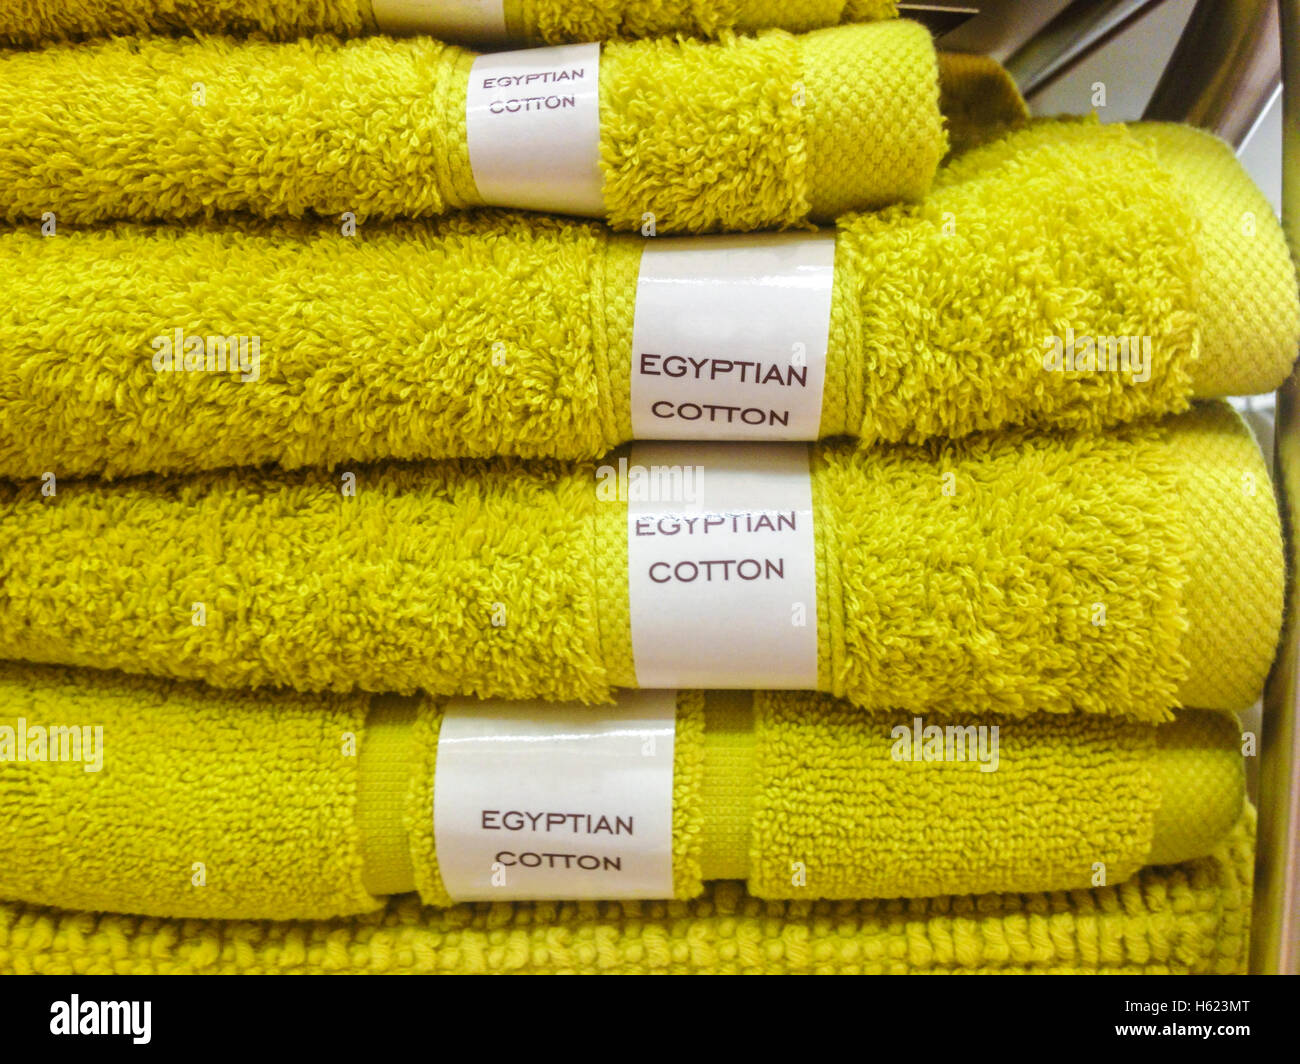 Towels, mats, robes and other home bath wear on shelves made of Egyptian Cotton Stock Photo